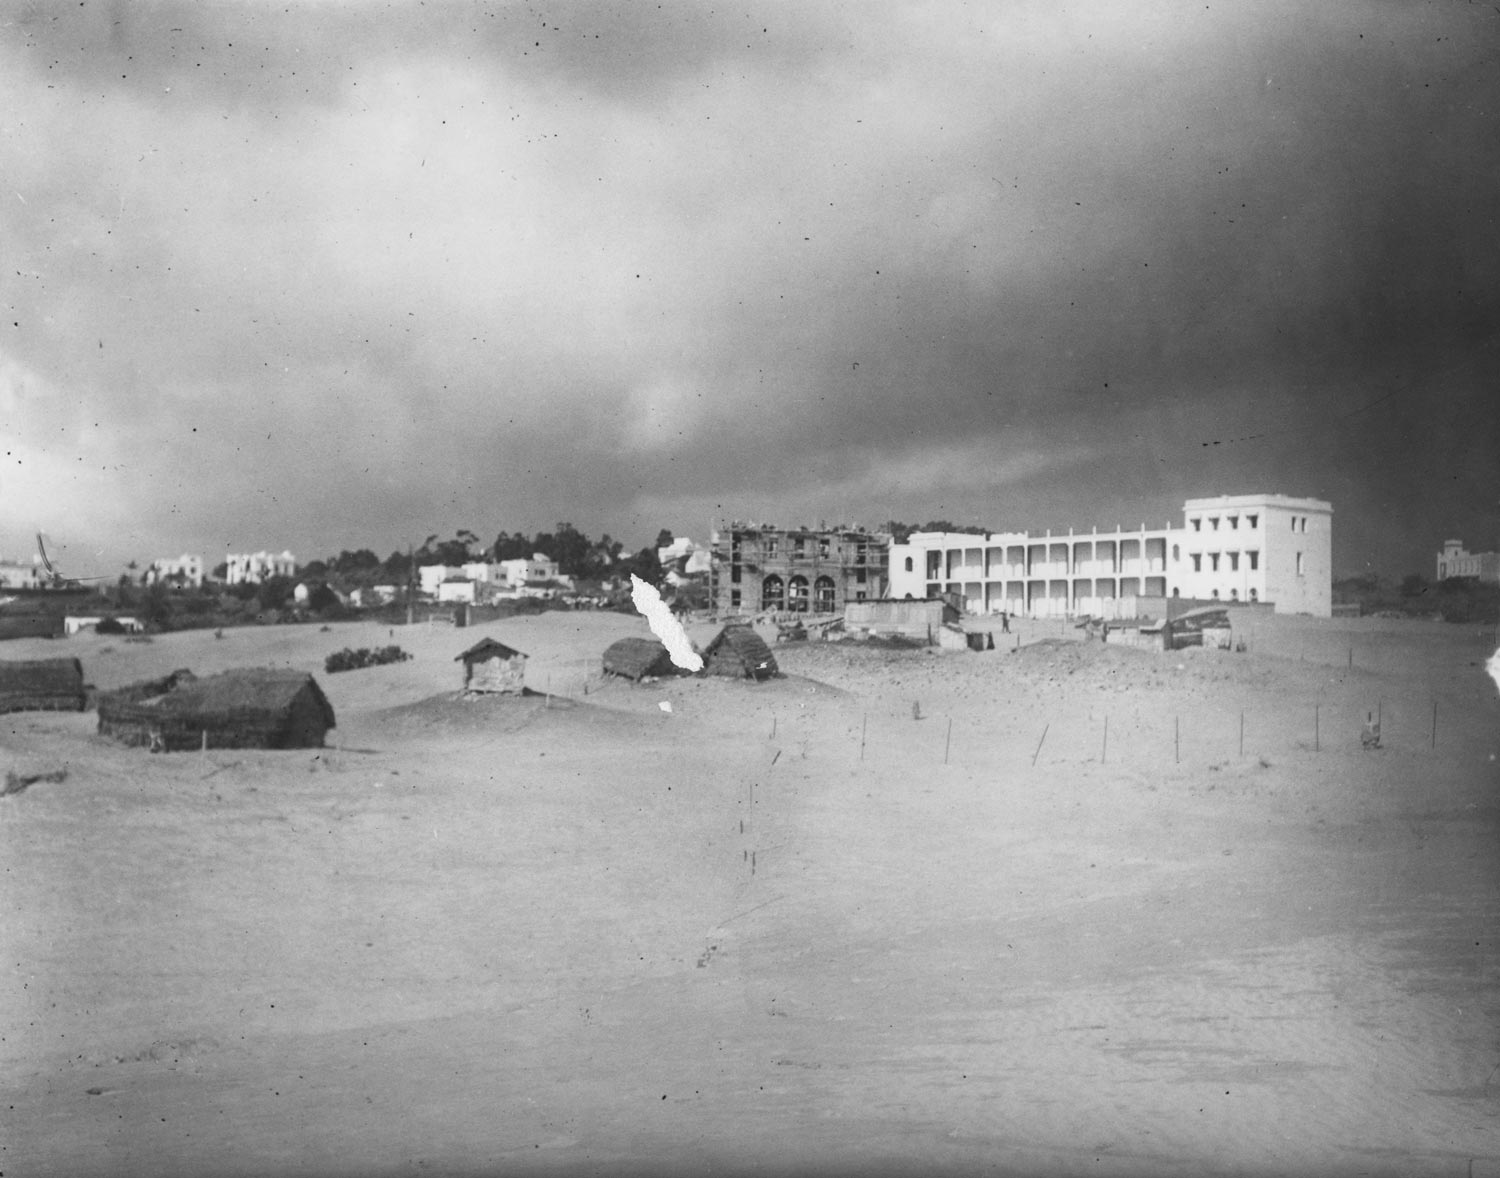 View over the sand toward the school under construction